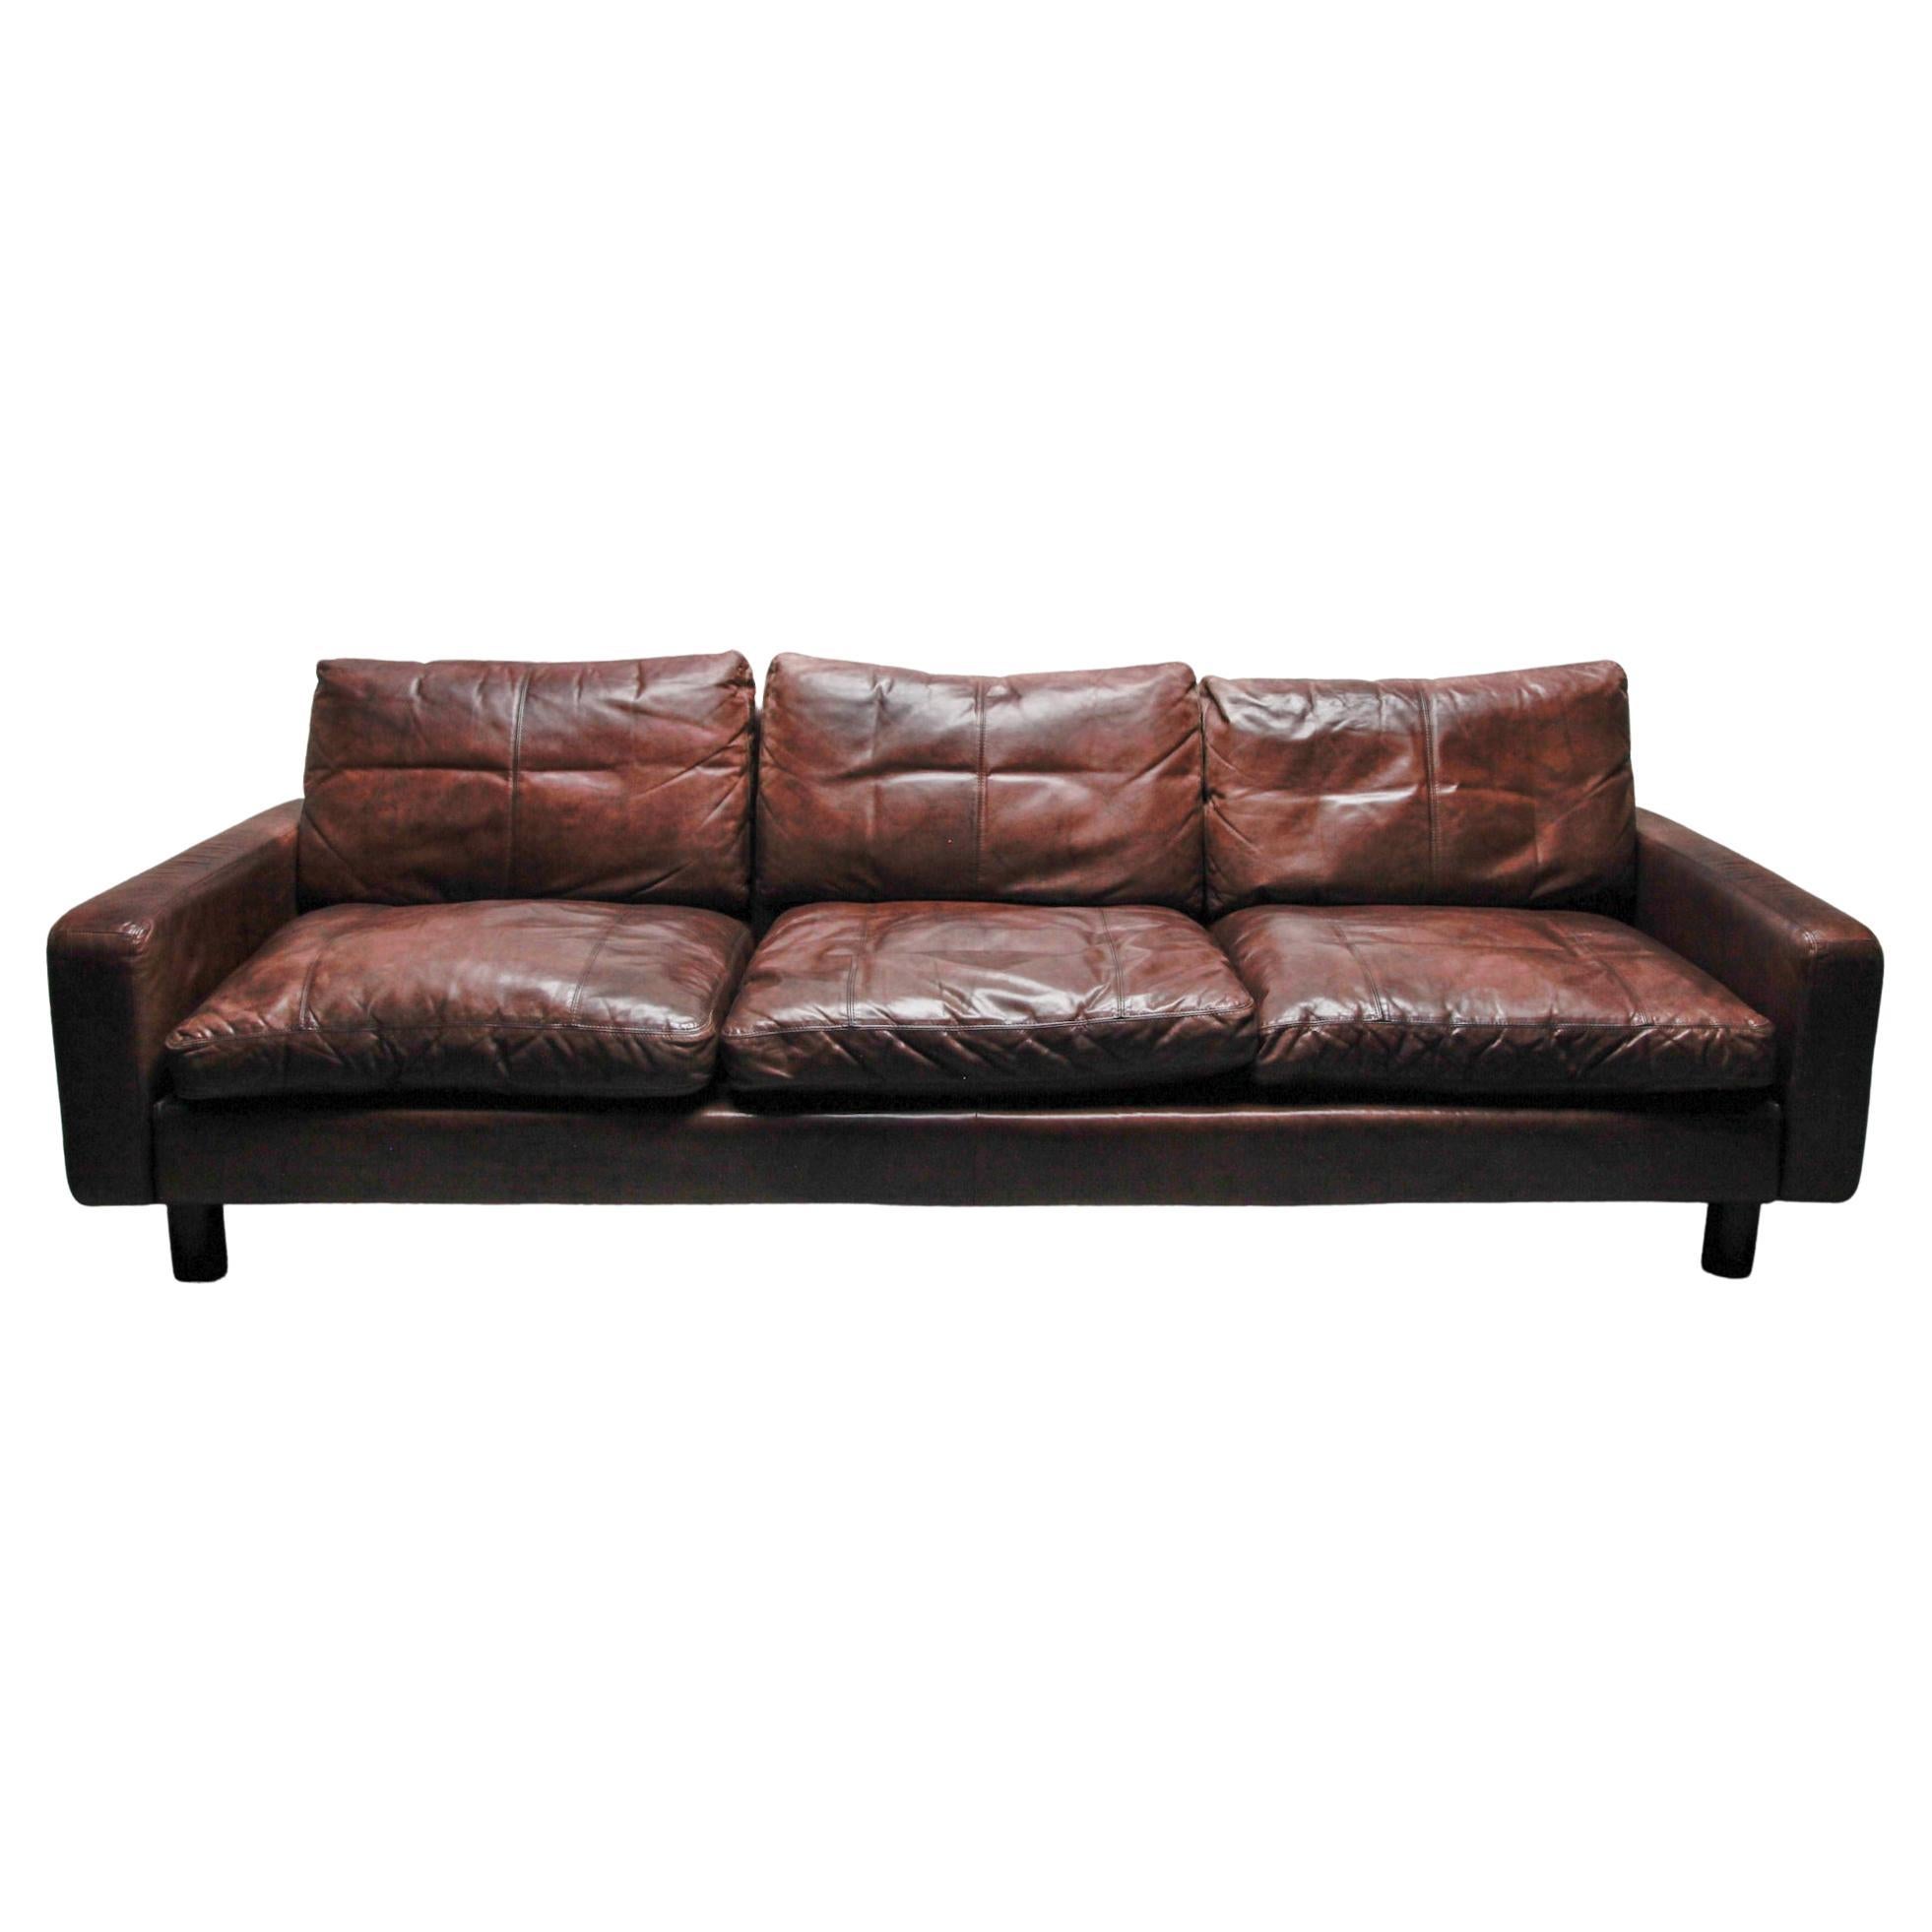 Three Seat Sofa Brown Leather designed by COR, 1970s, Germany